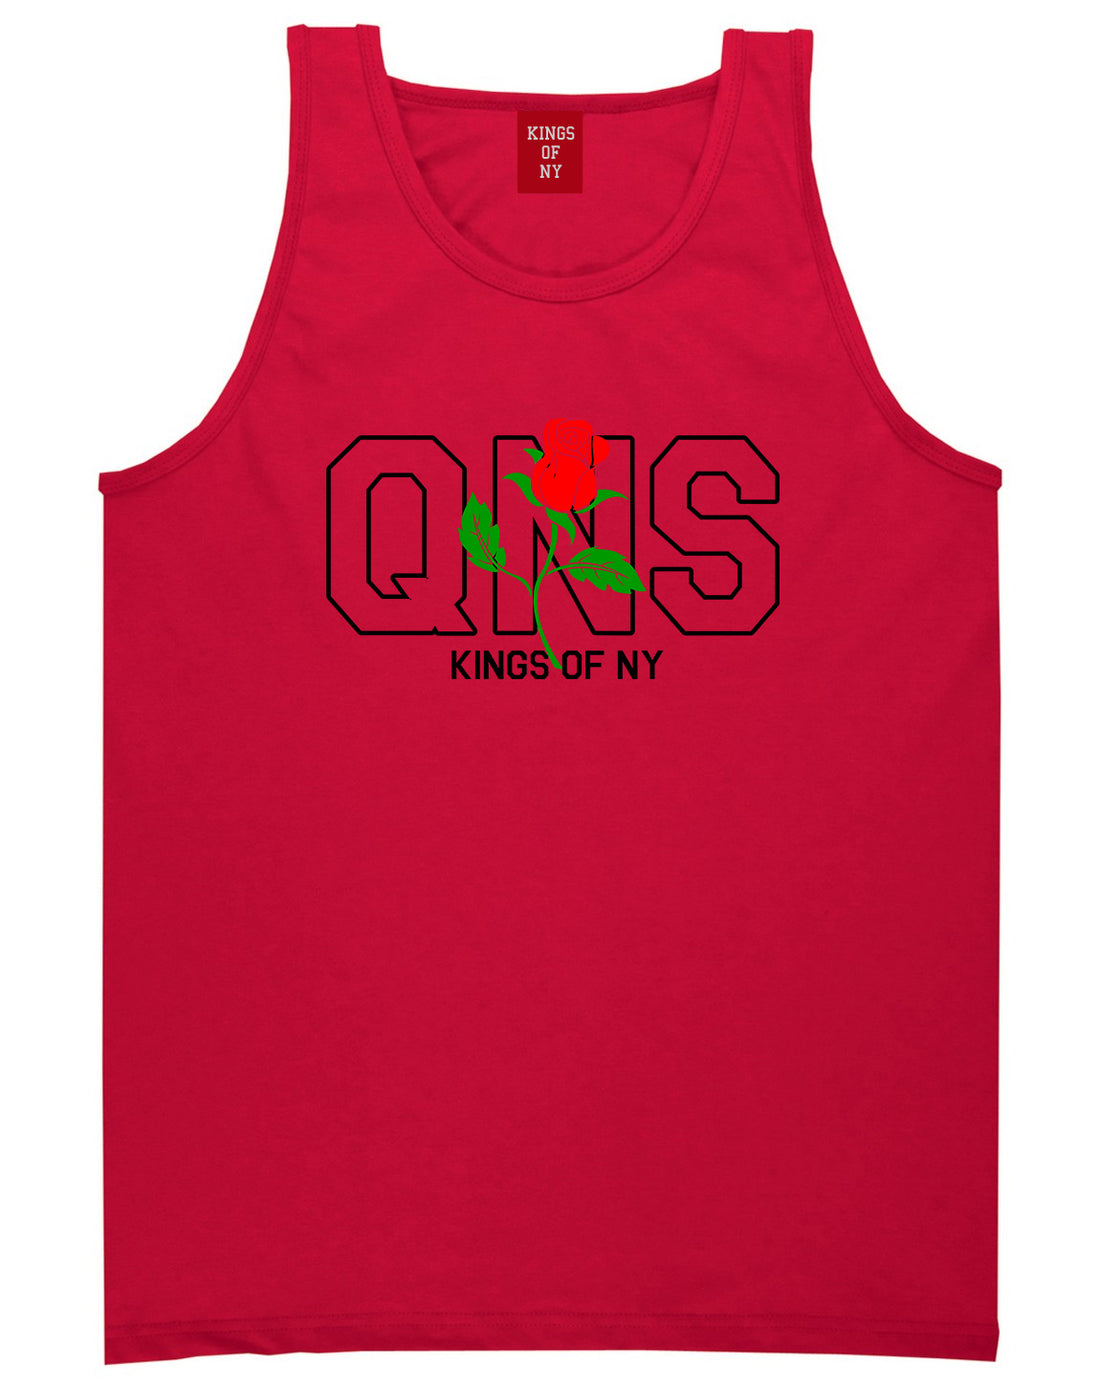 Rose QNS Queens Kings Of NY Mens Tank Top T-Shirt Red